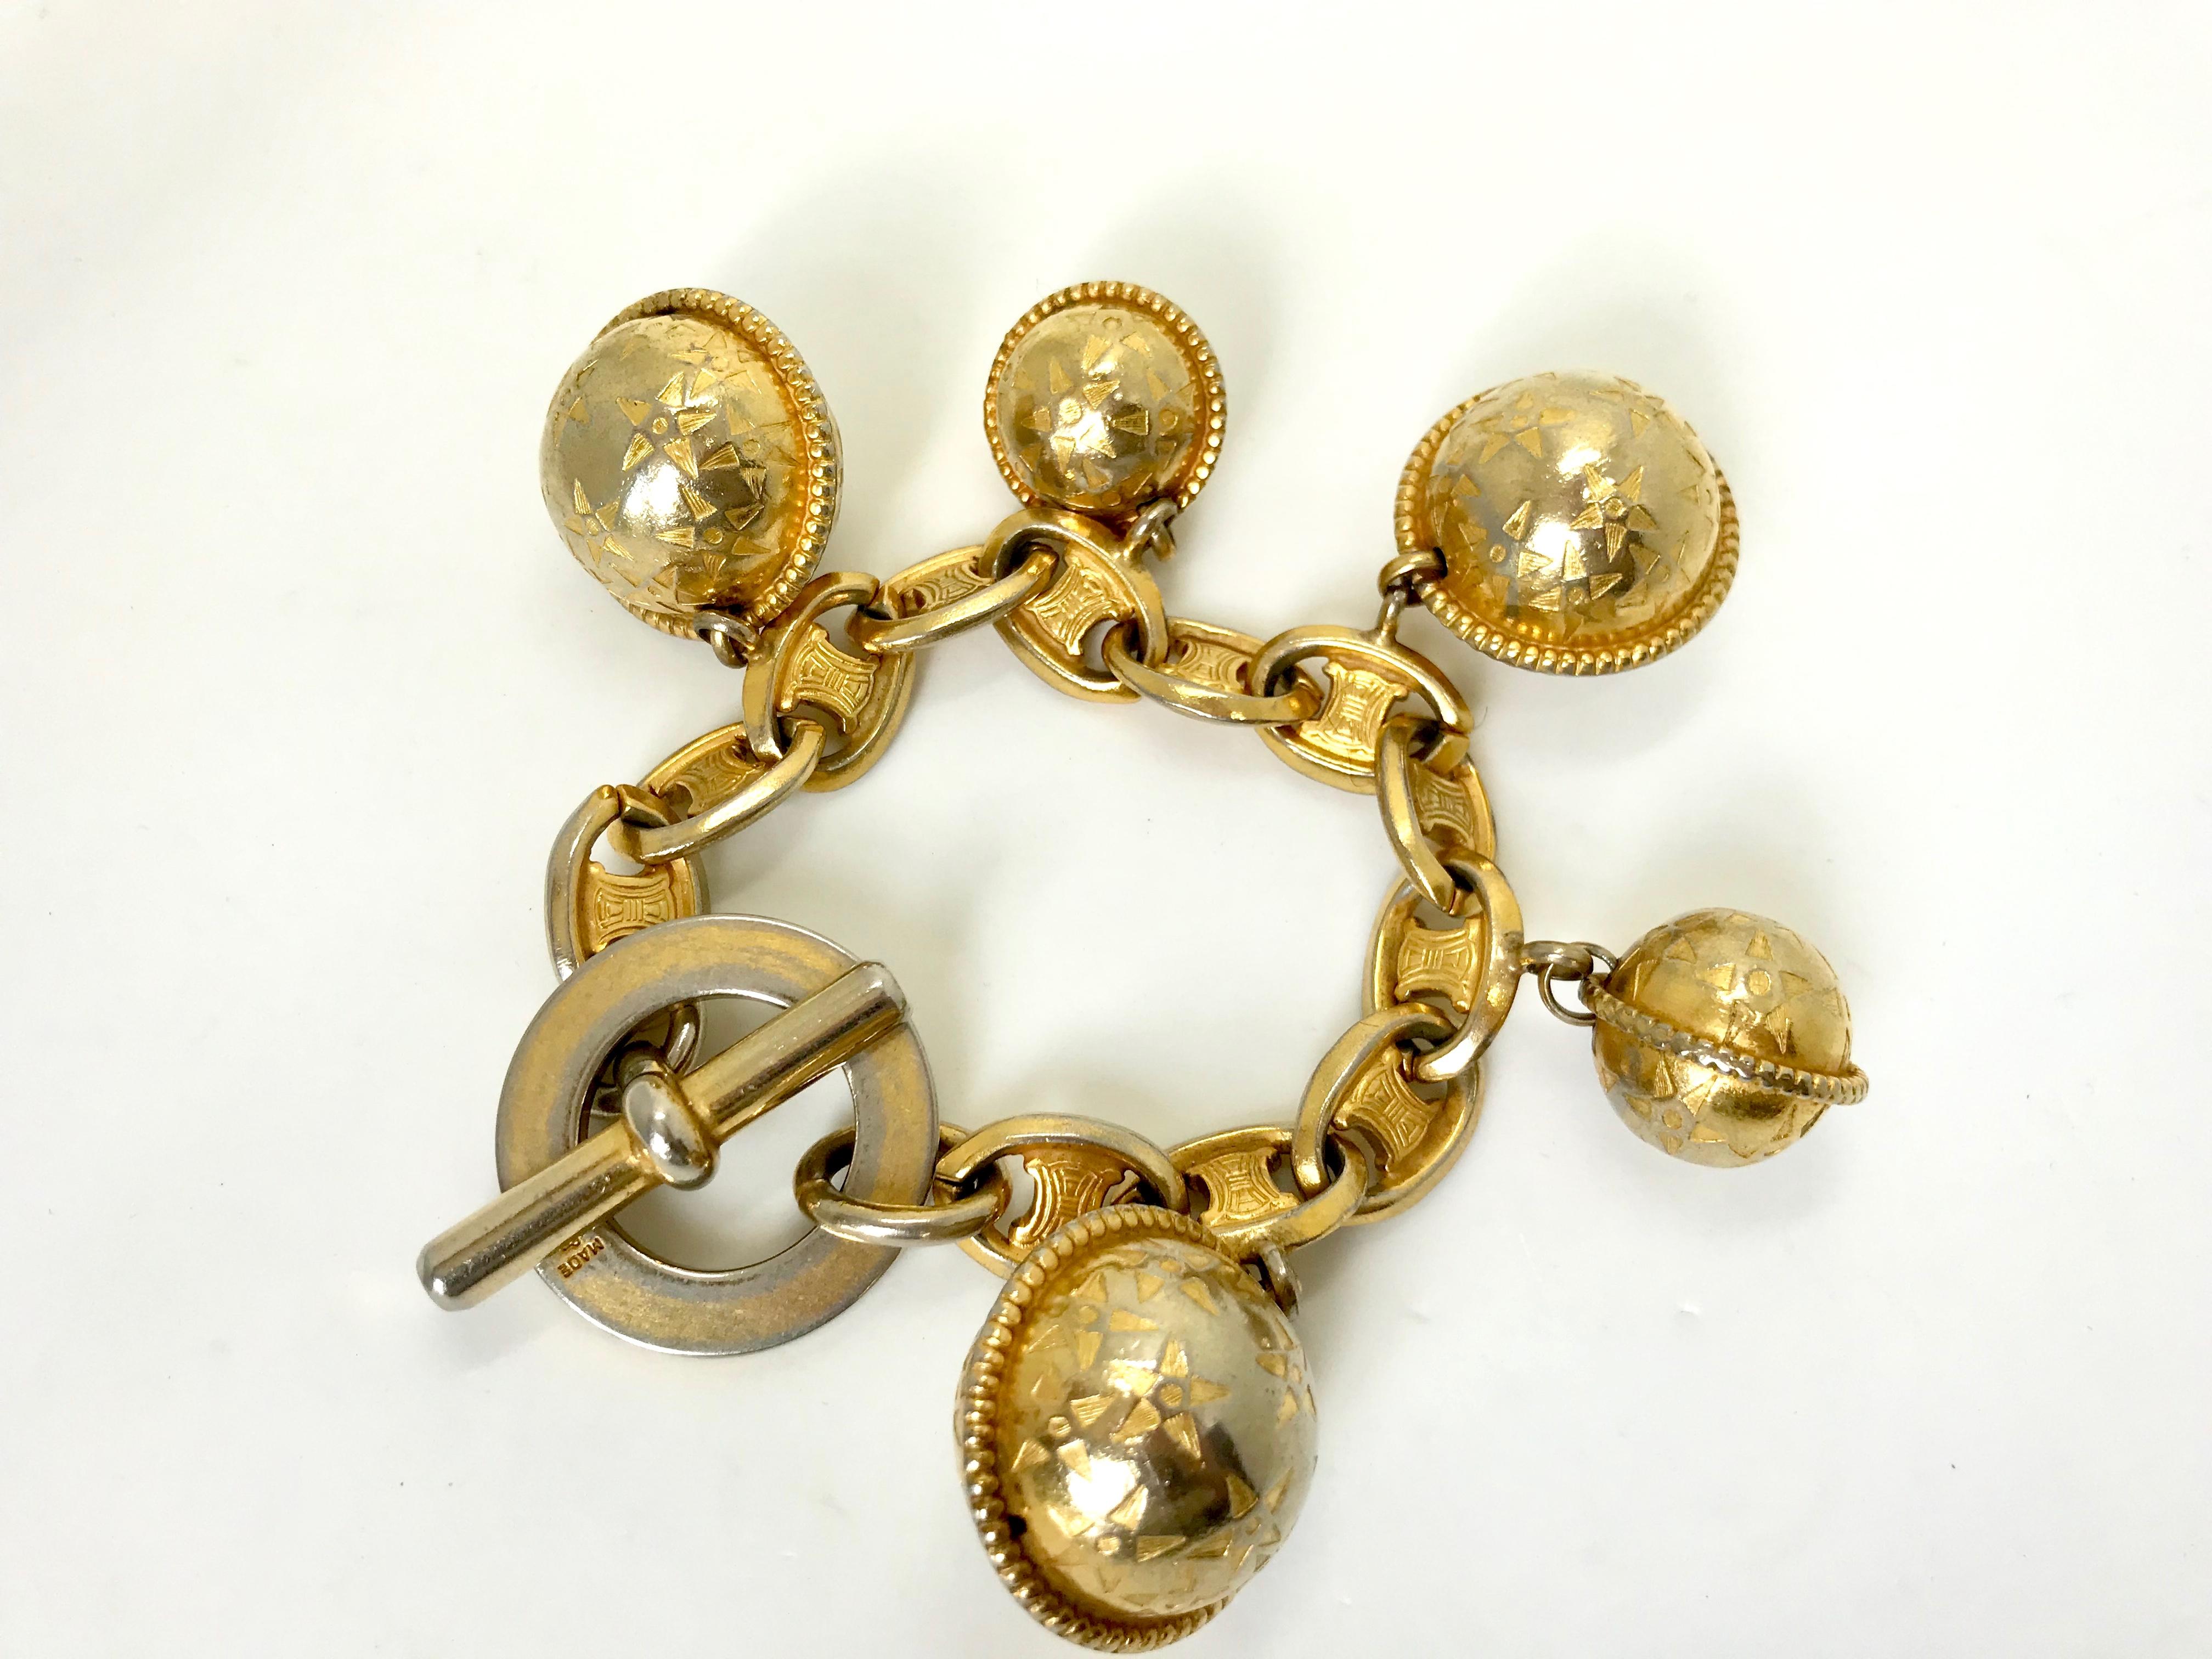 Celine 1980s Vintage Globe Charm Bracelet

Celine 1980s Vintage Globe Bracelet.  The chain is made of the Celine Macadam logos and is made of gold tone metal. 4 large and small iconic Celine globe charms hang from the chain.

A real statement show